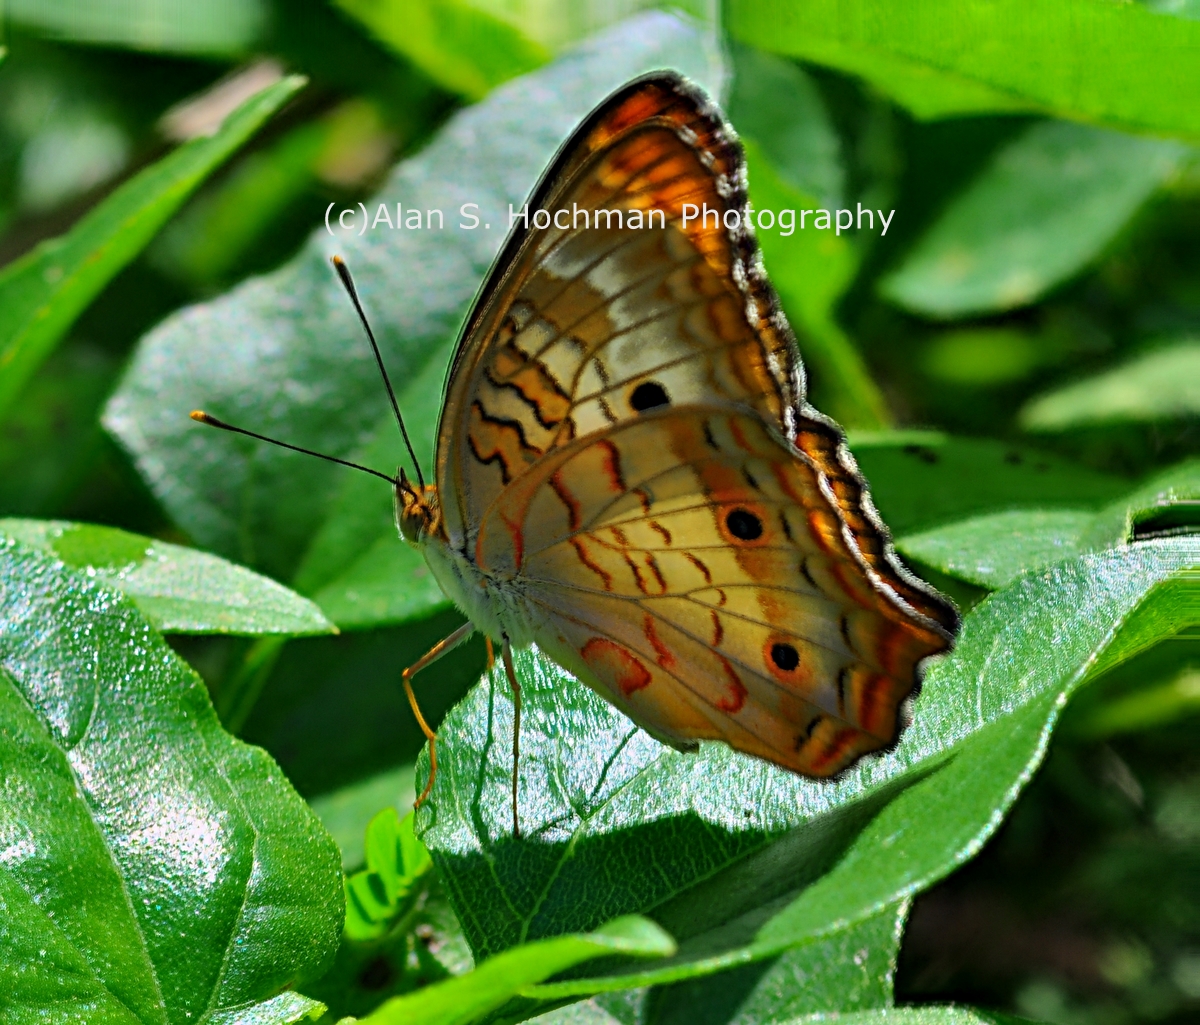 "White Peacock Butterfly at Oleta River State Park"